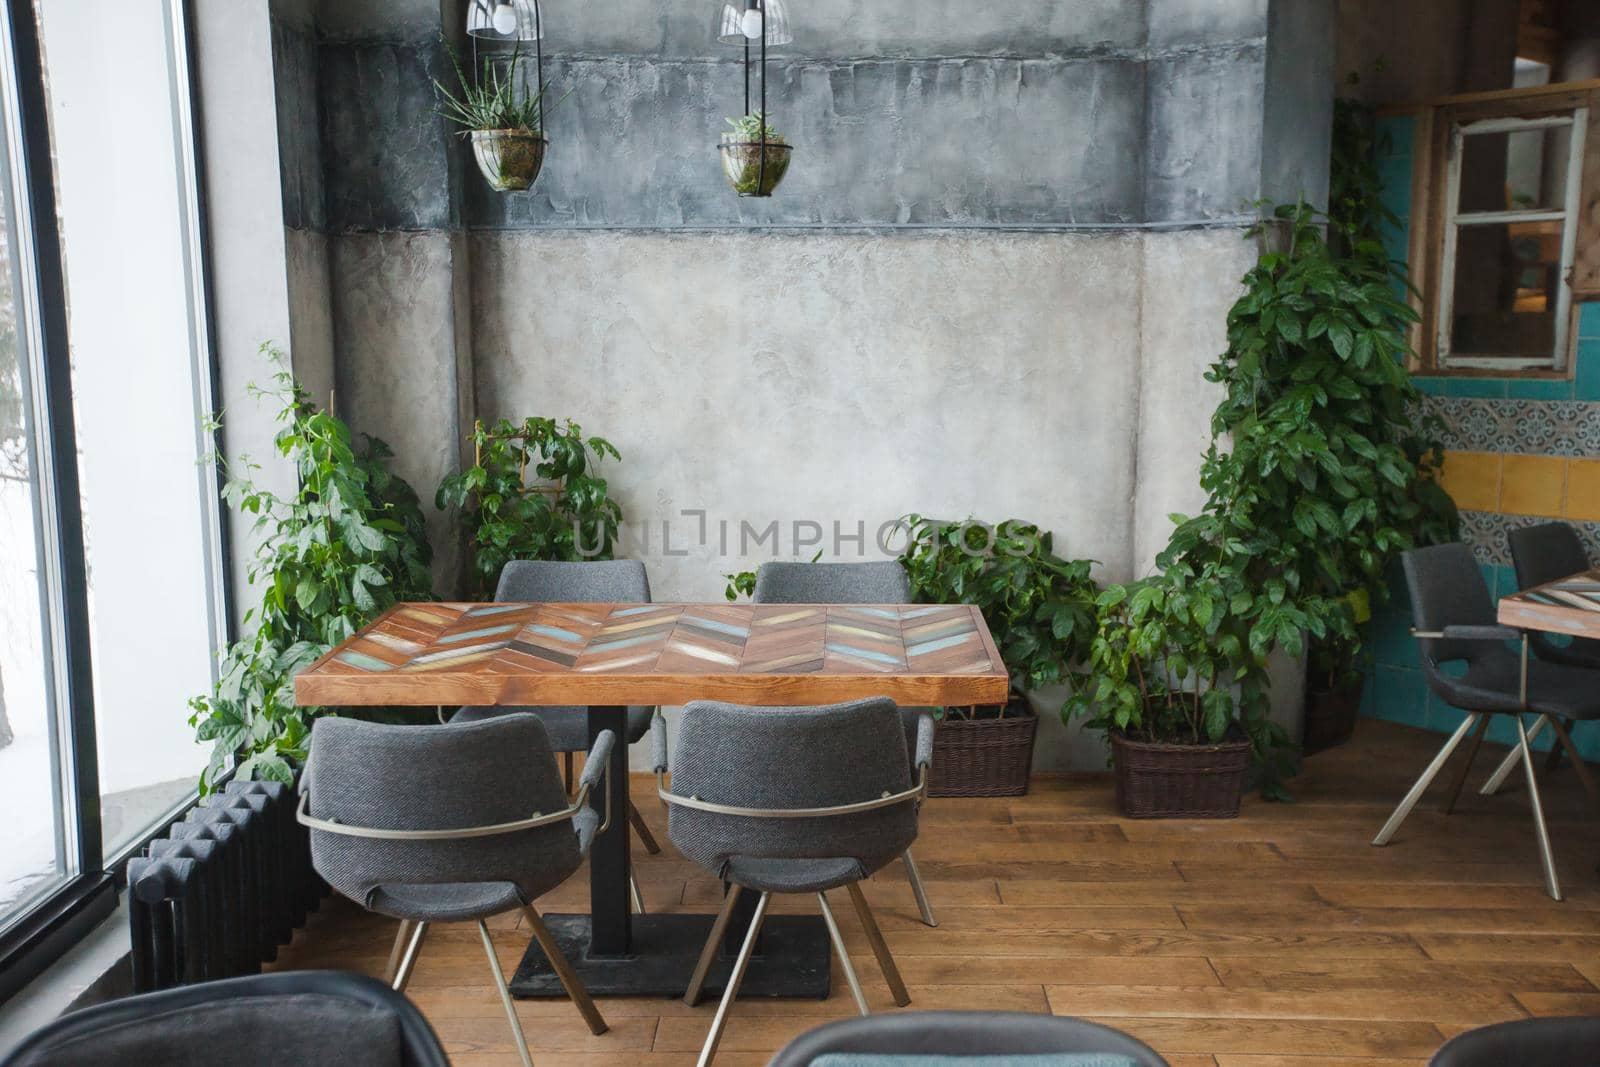 Interior shot of cafeteria with modern design and furniture decorated with plenty of green plants.